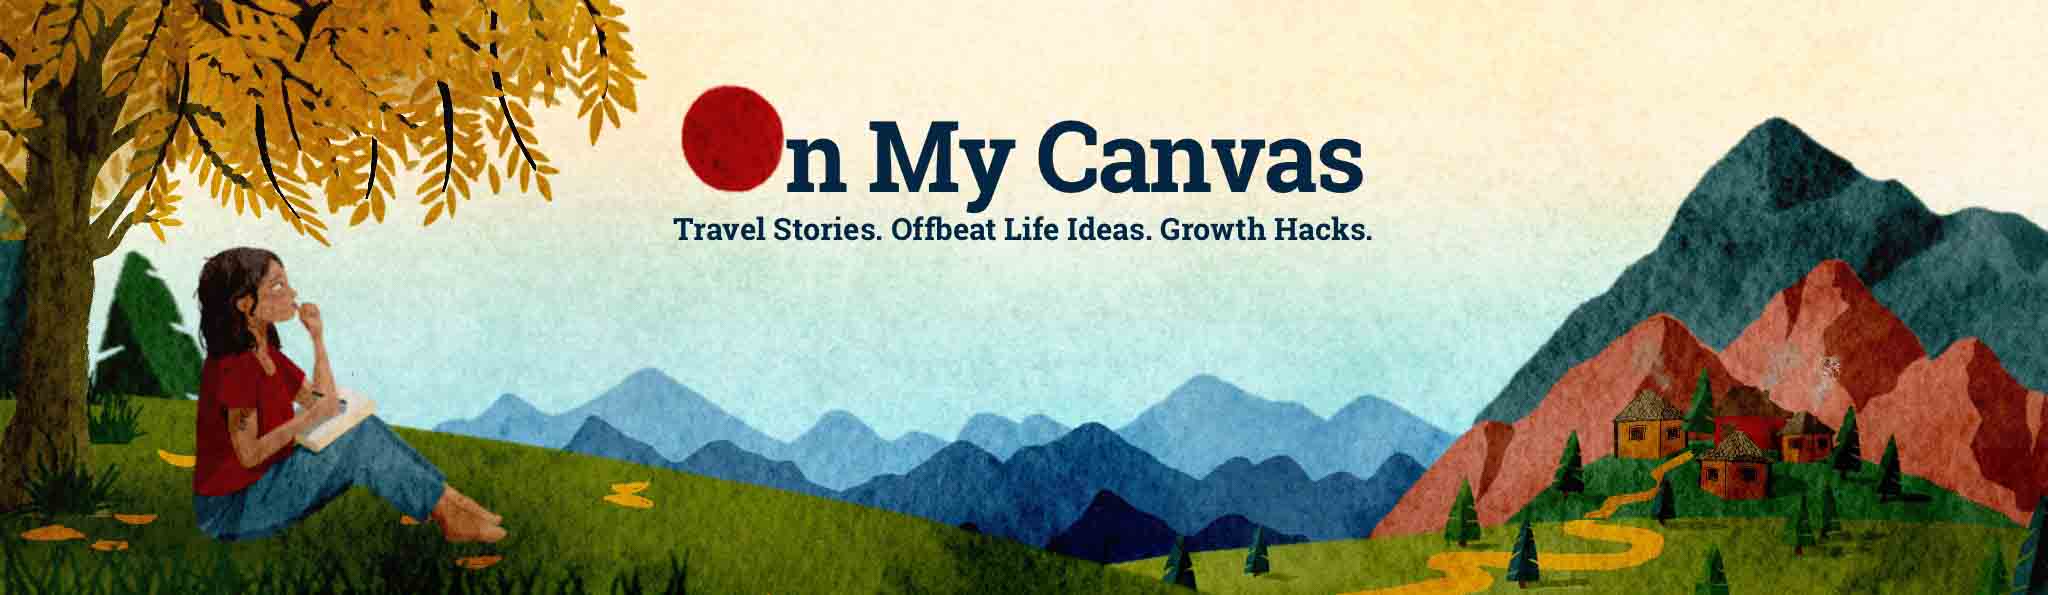 personal growth and travel blog on my canvas homepage banner image